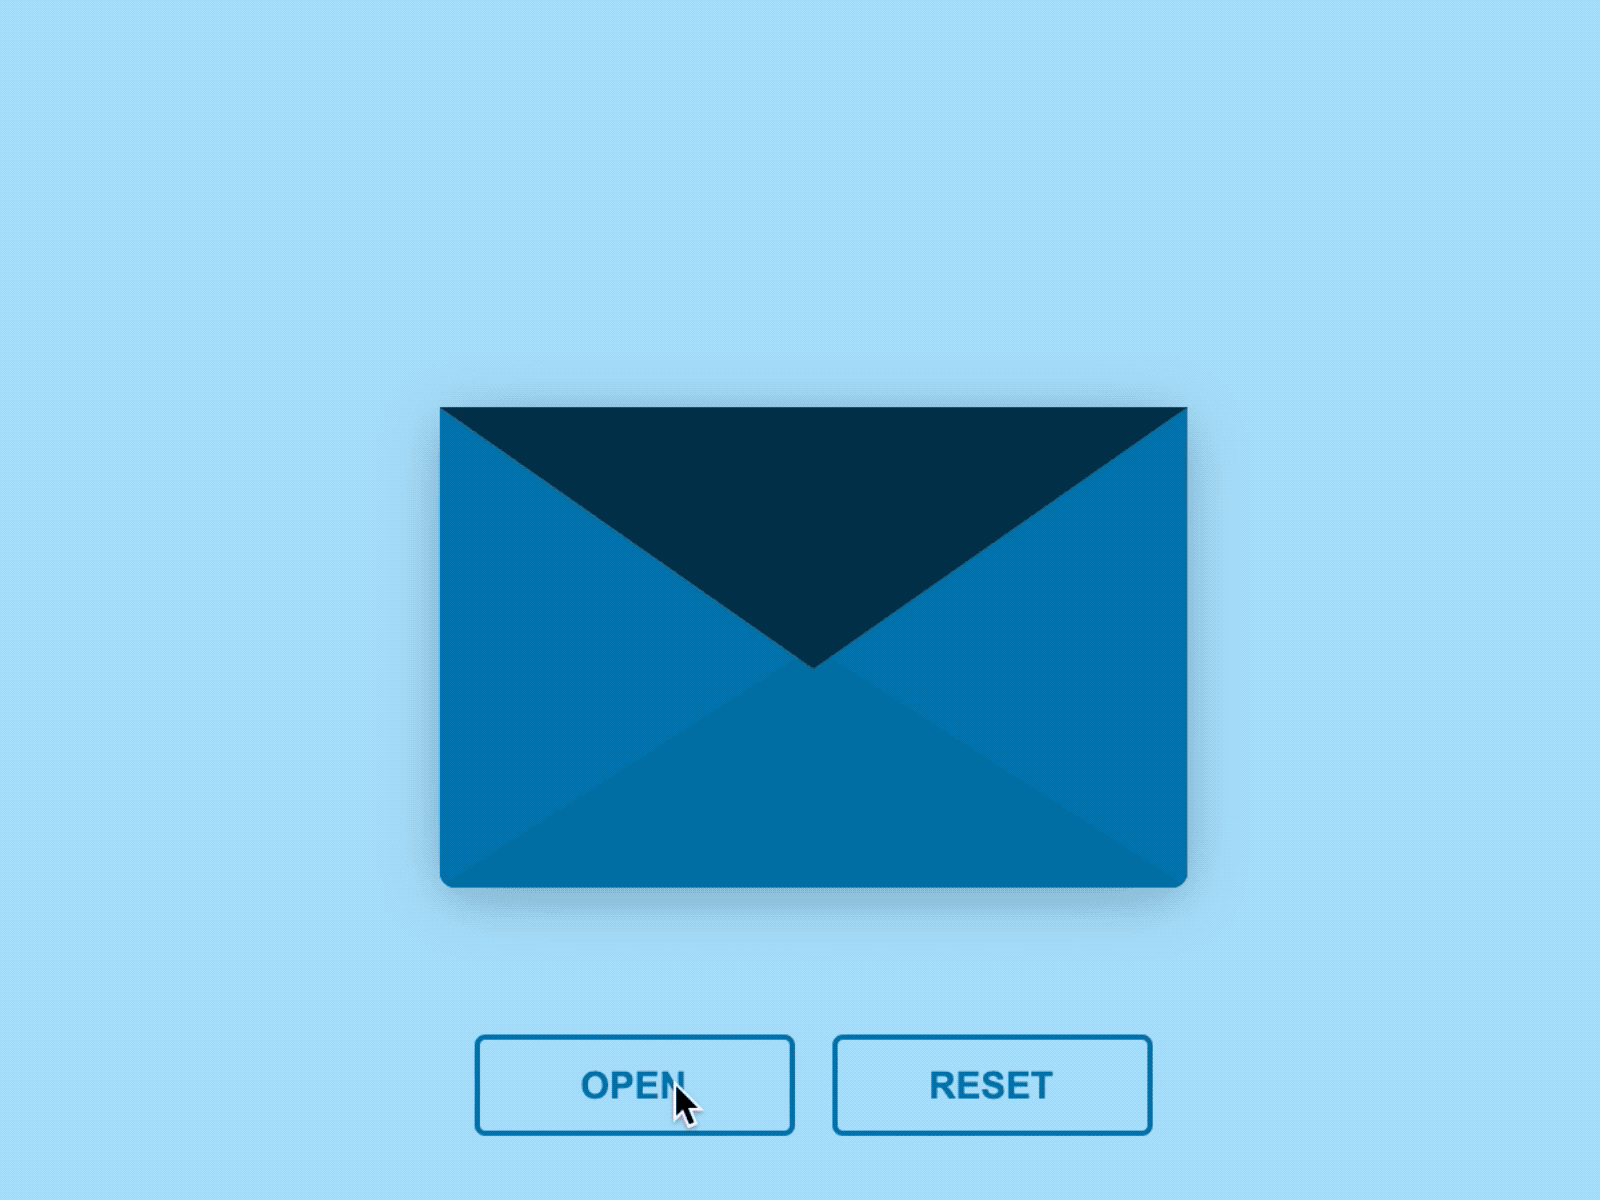 Envelope Open Animation with Hearts by Josh Nichols on Dribbble